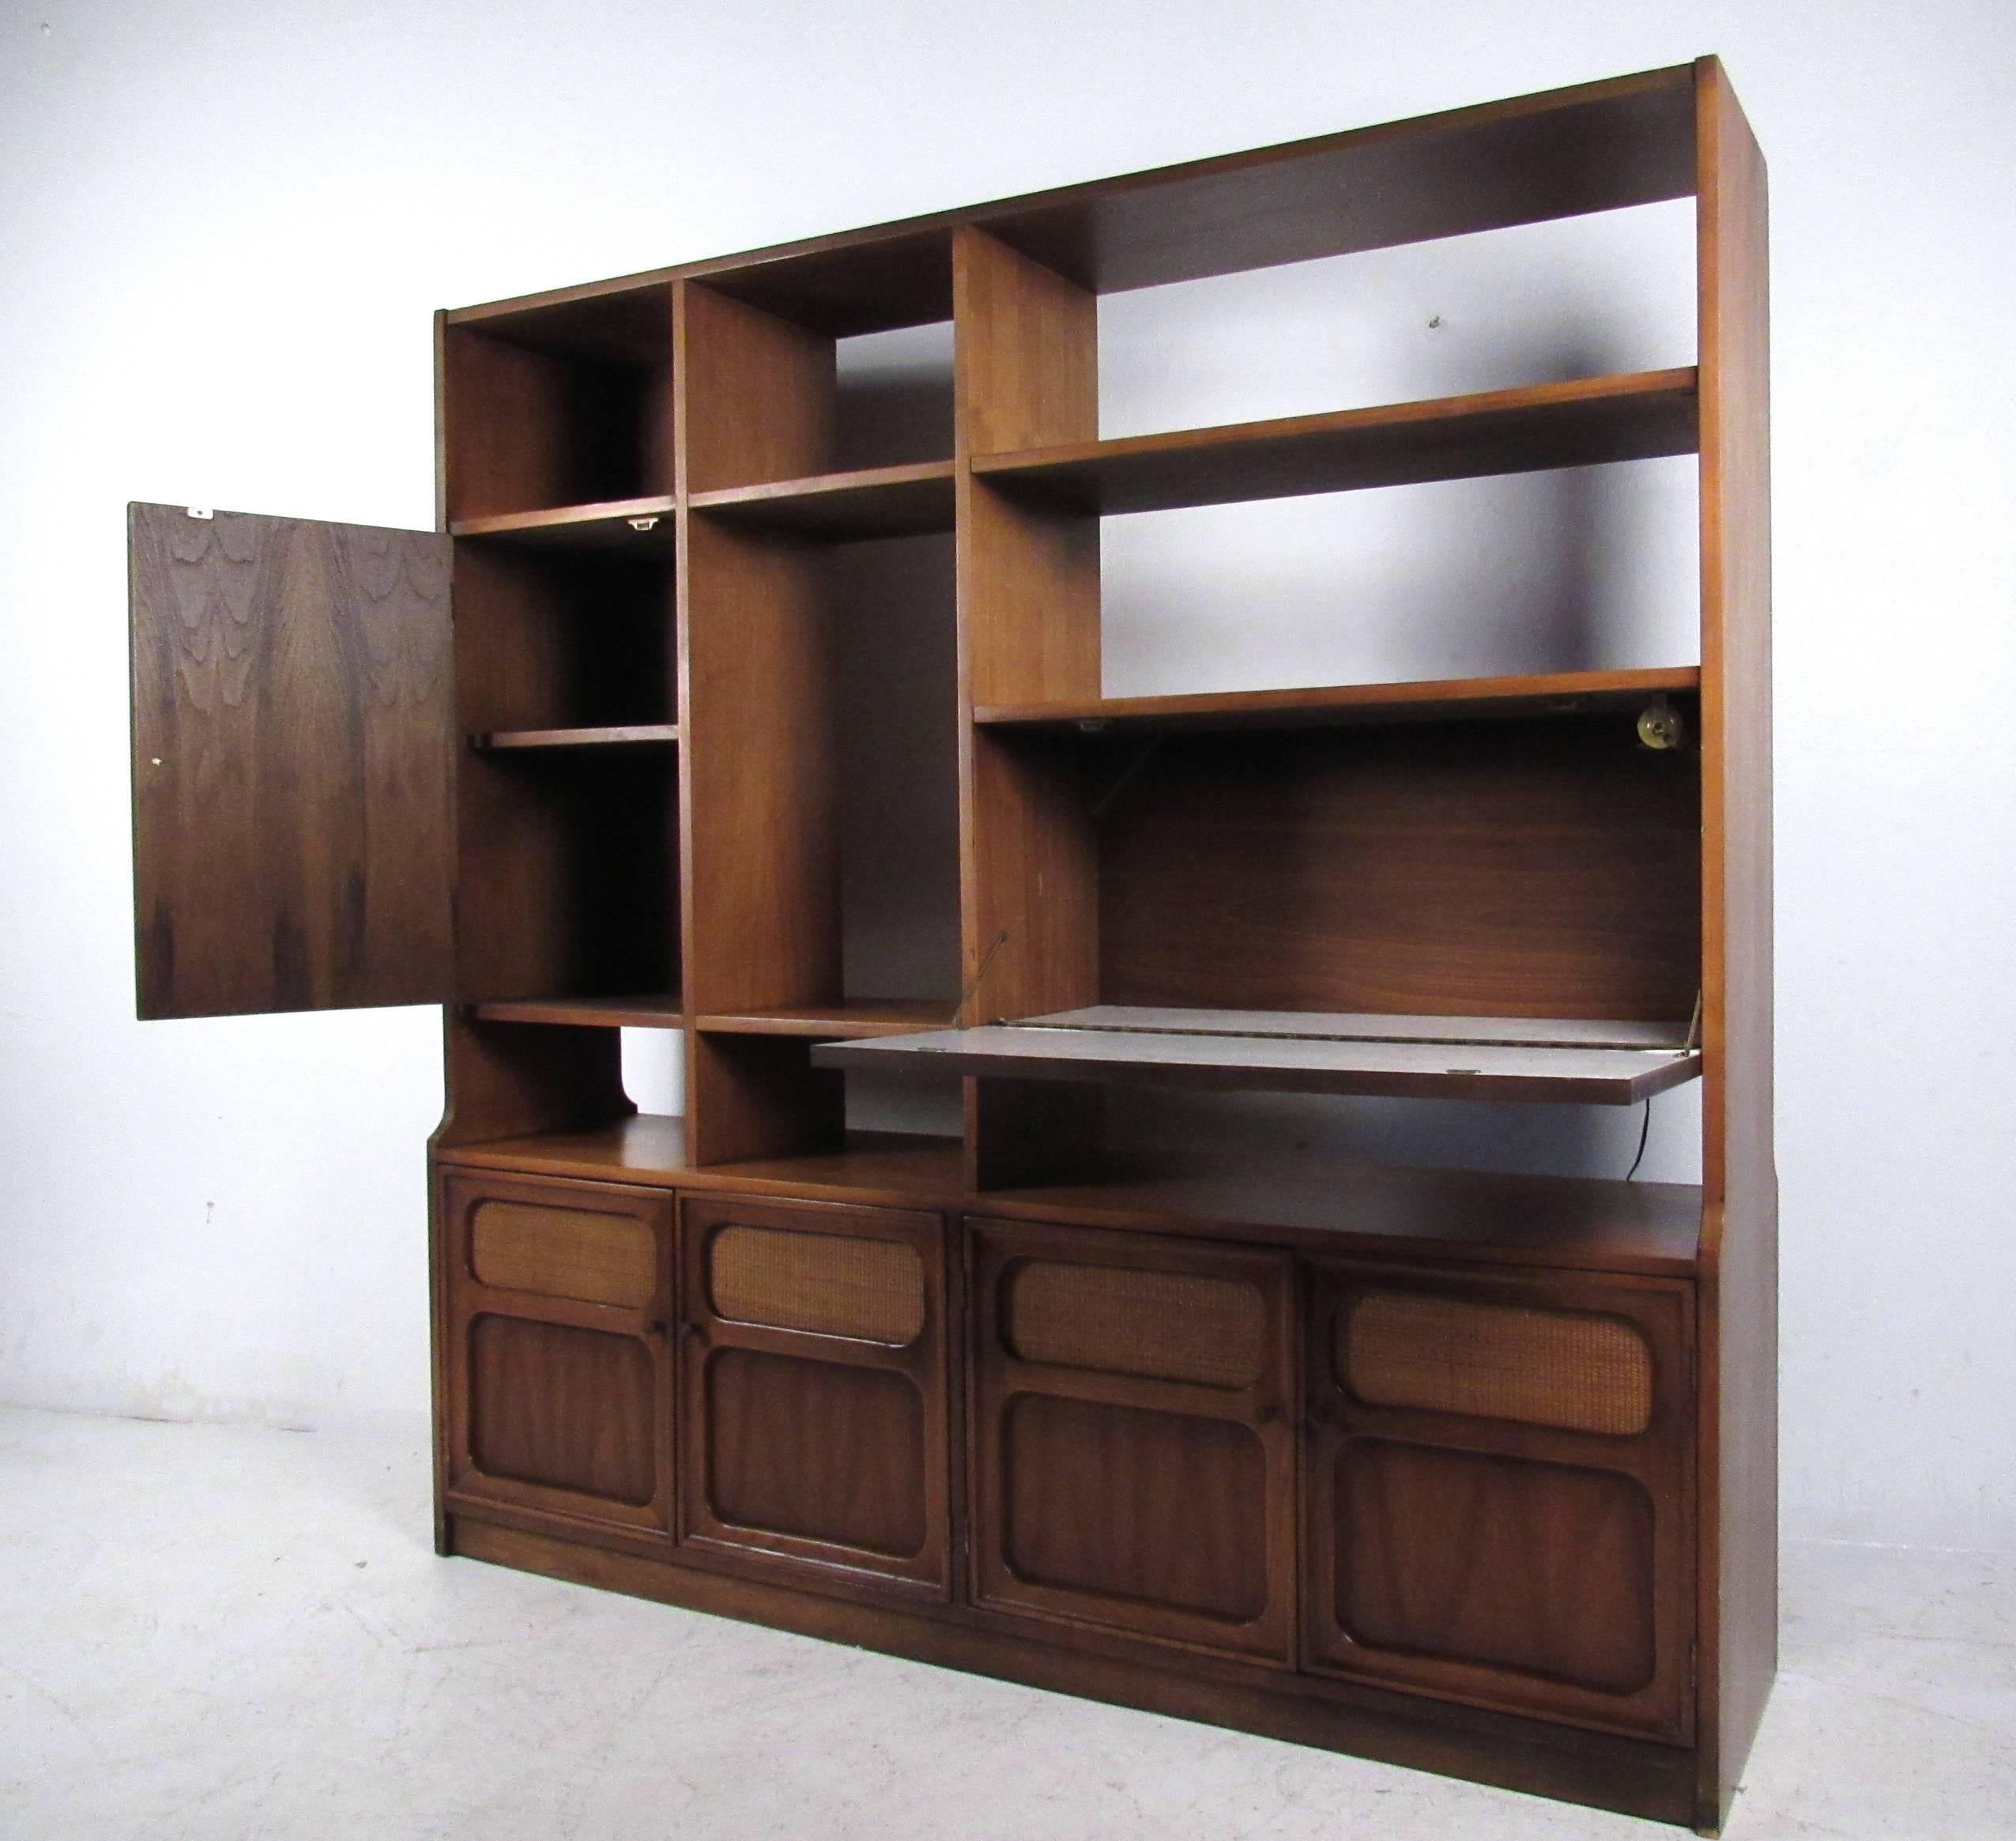 This lovely vintage wall unit offers a stylish combination of storage and display options including backlight drop front dry bar, reversible panel cabinet storage and ample open shelf space. Wonderful natural wood finish is offset by cane front